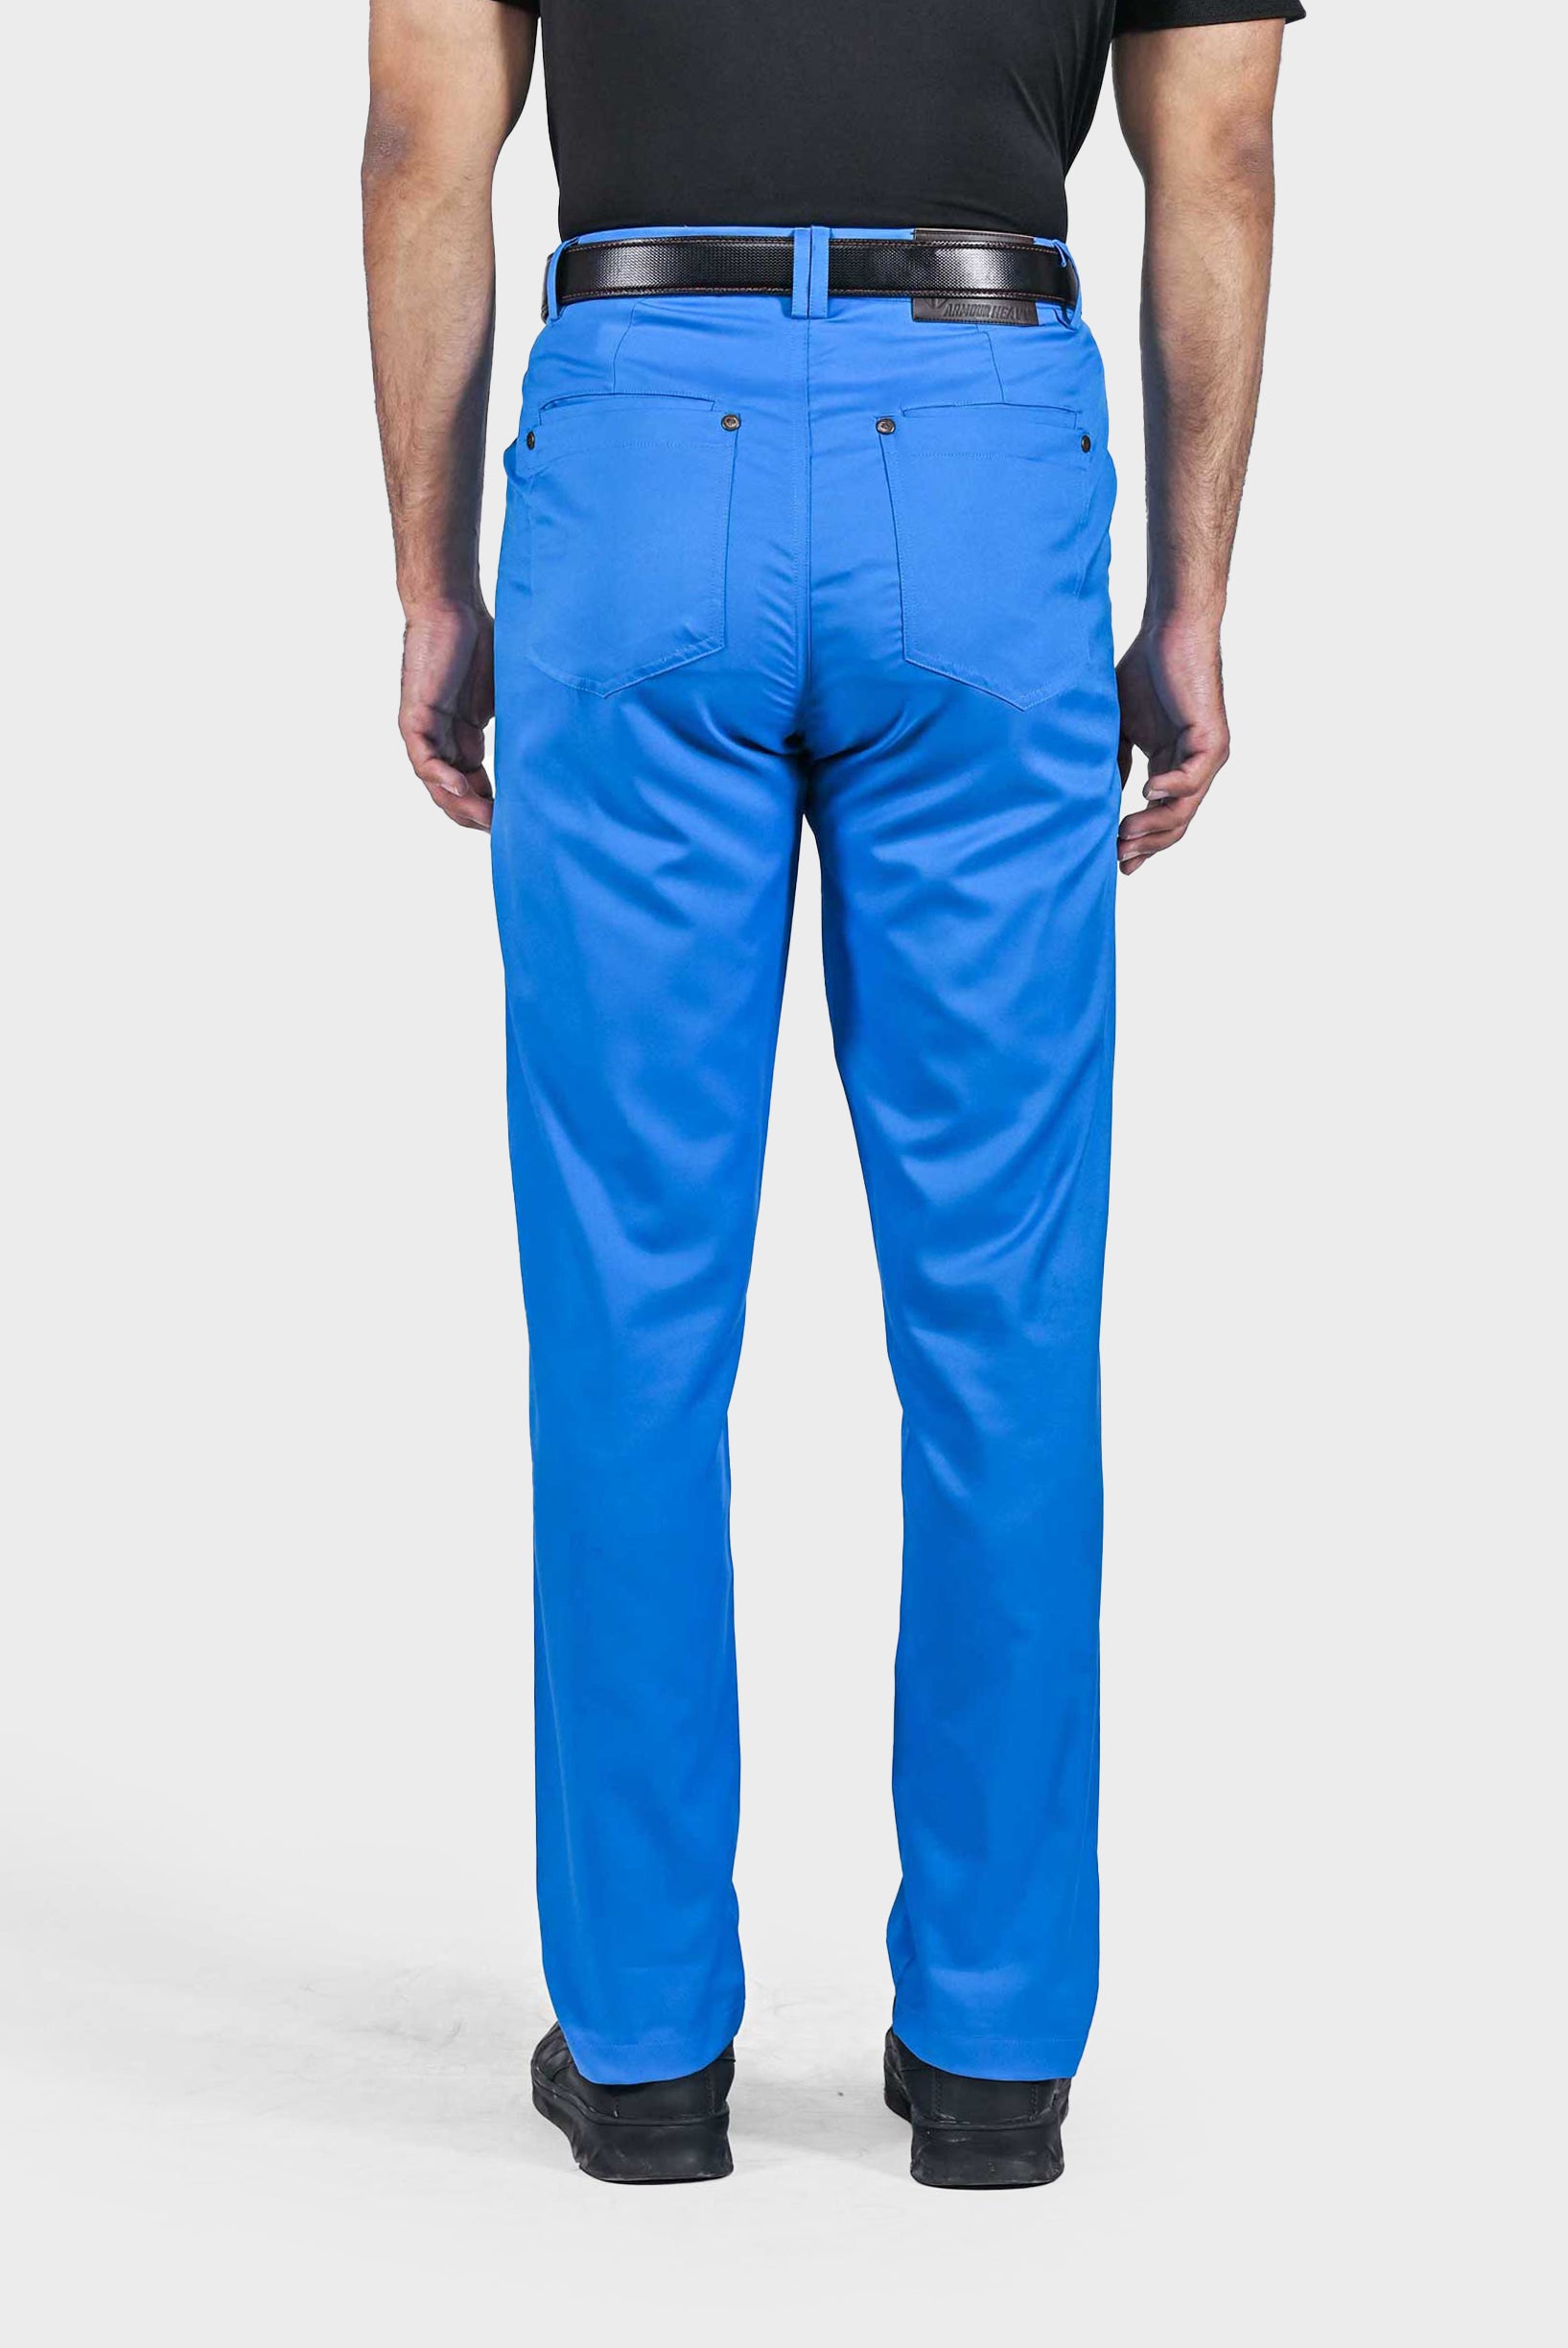 Buy Blackberrys Formal Trousers Online At Best Price Offers In India